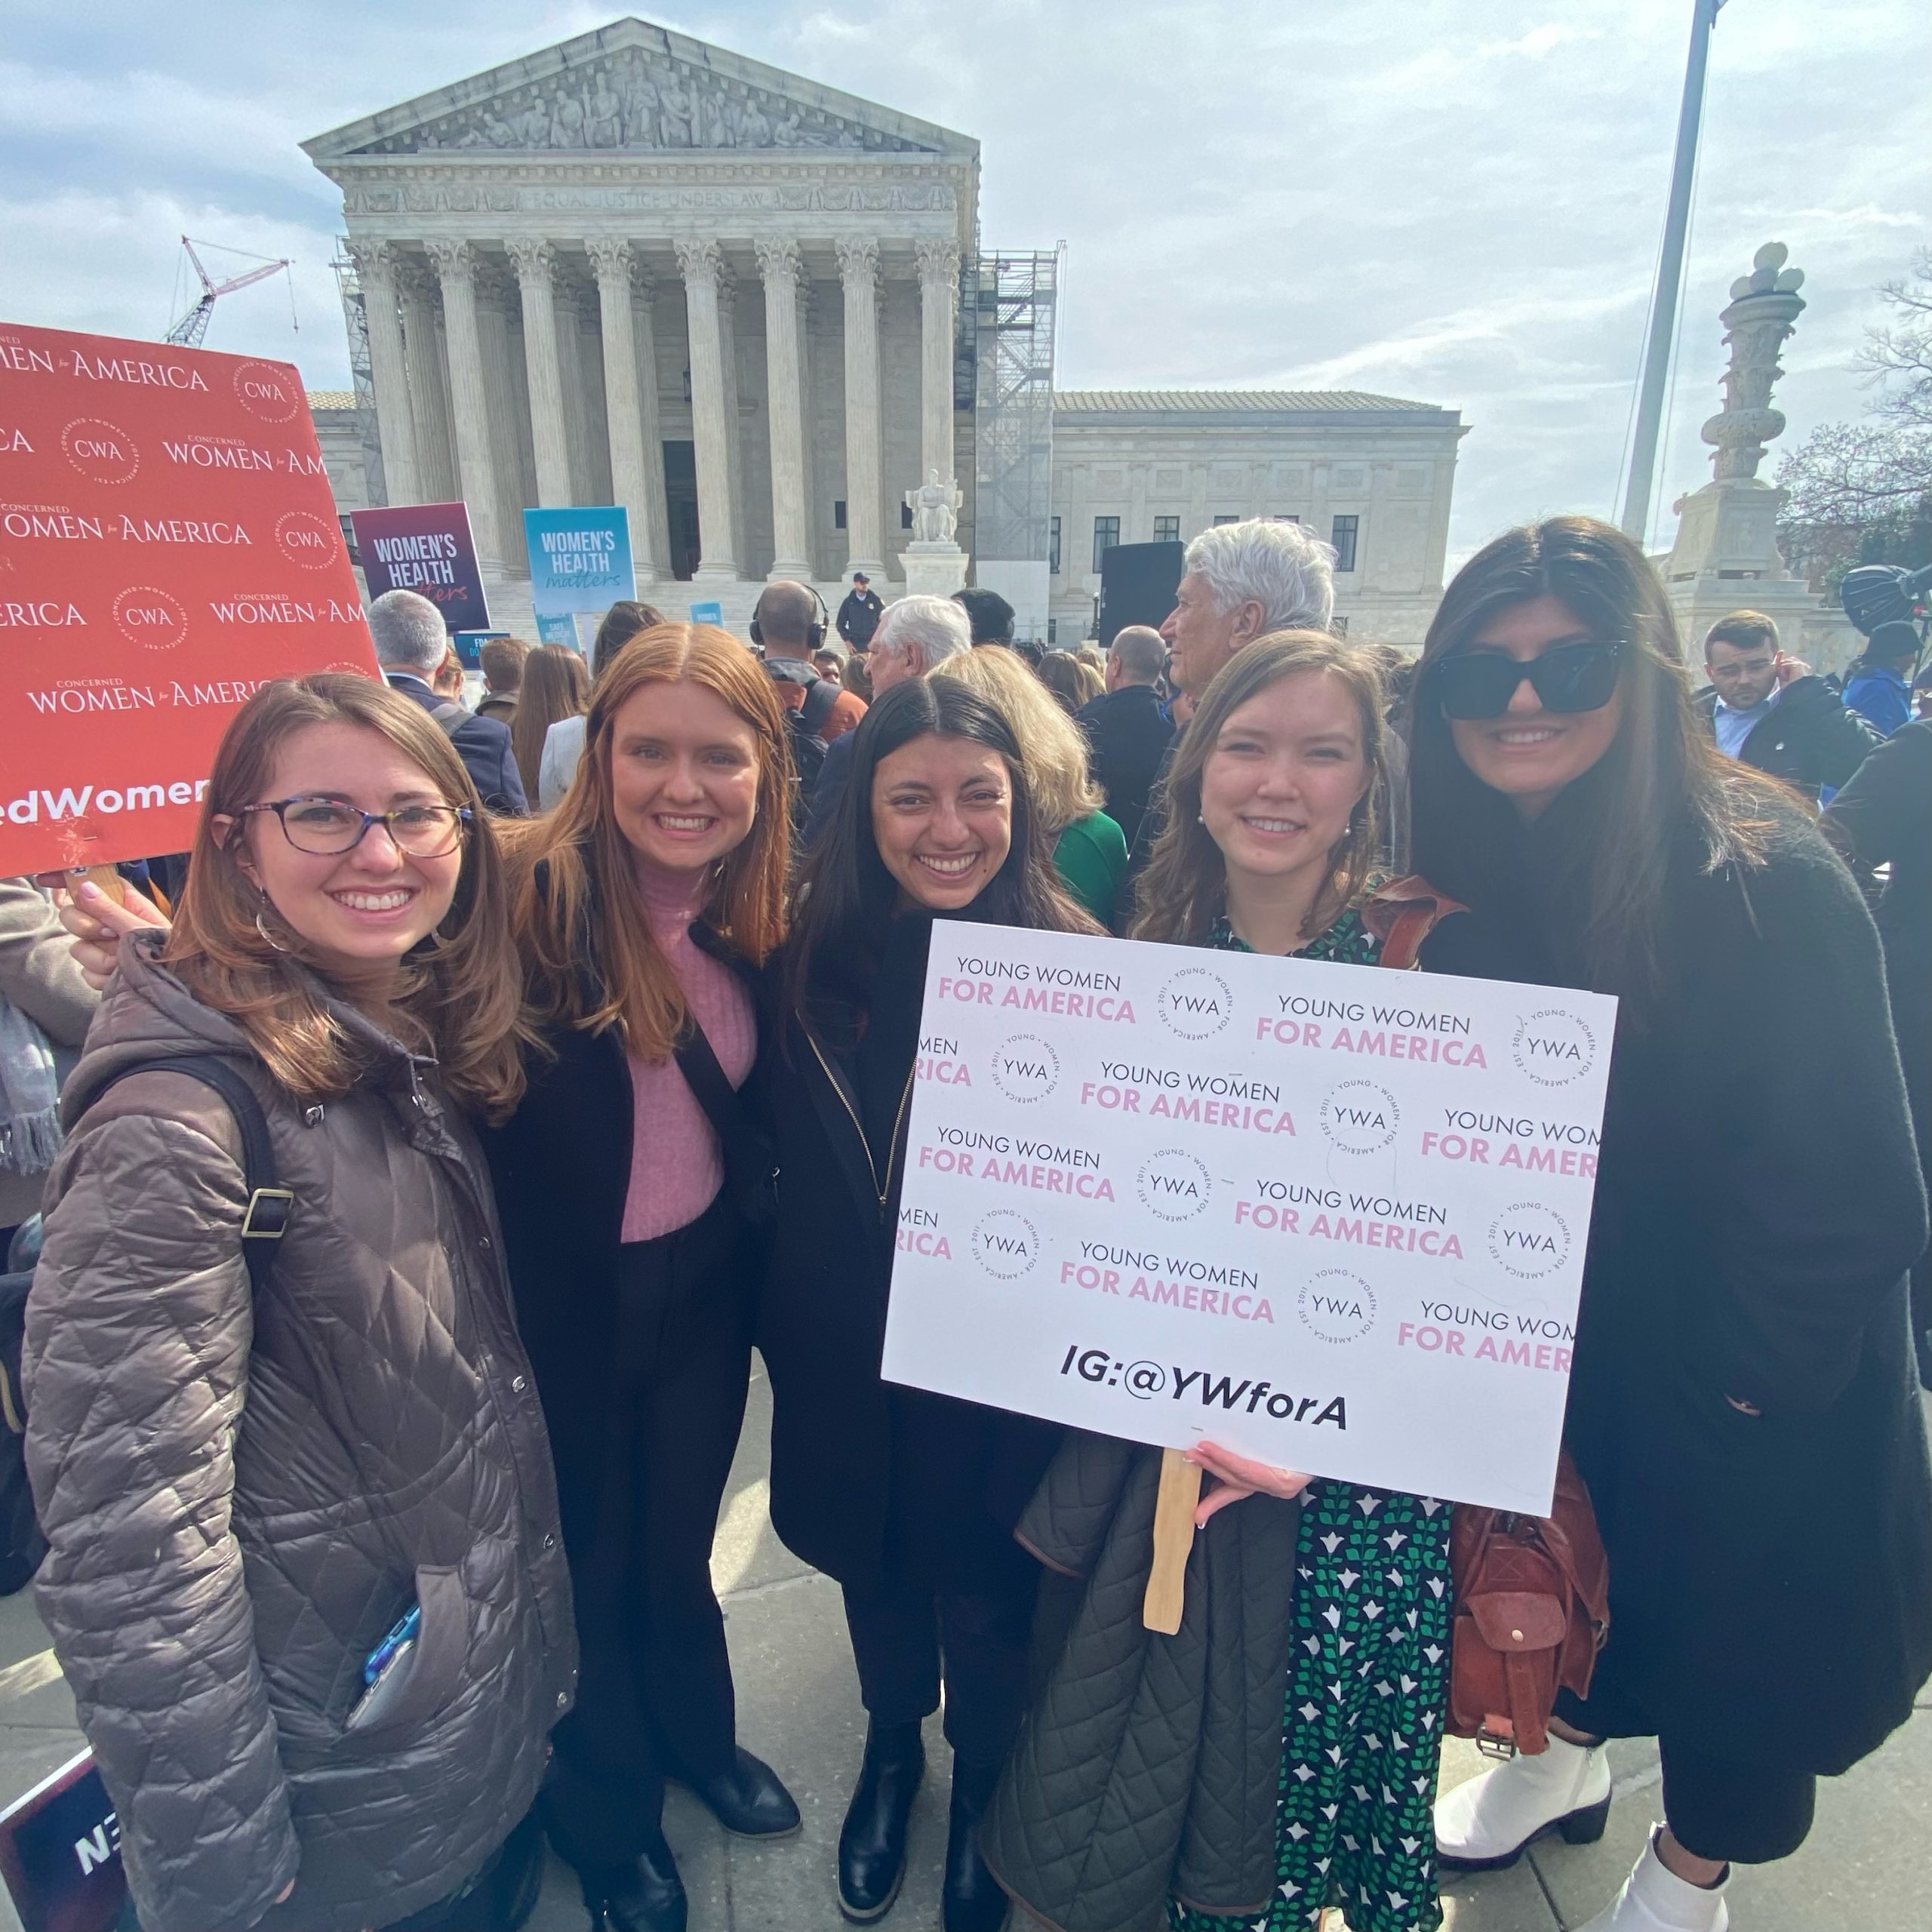 CWA Rallies for Women’s Health & Safety Rally at the U.S. Supreme Court